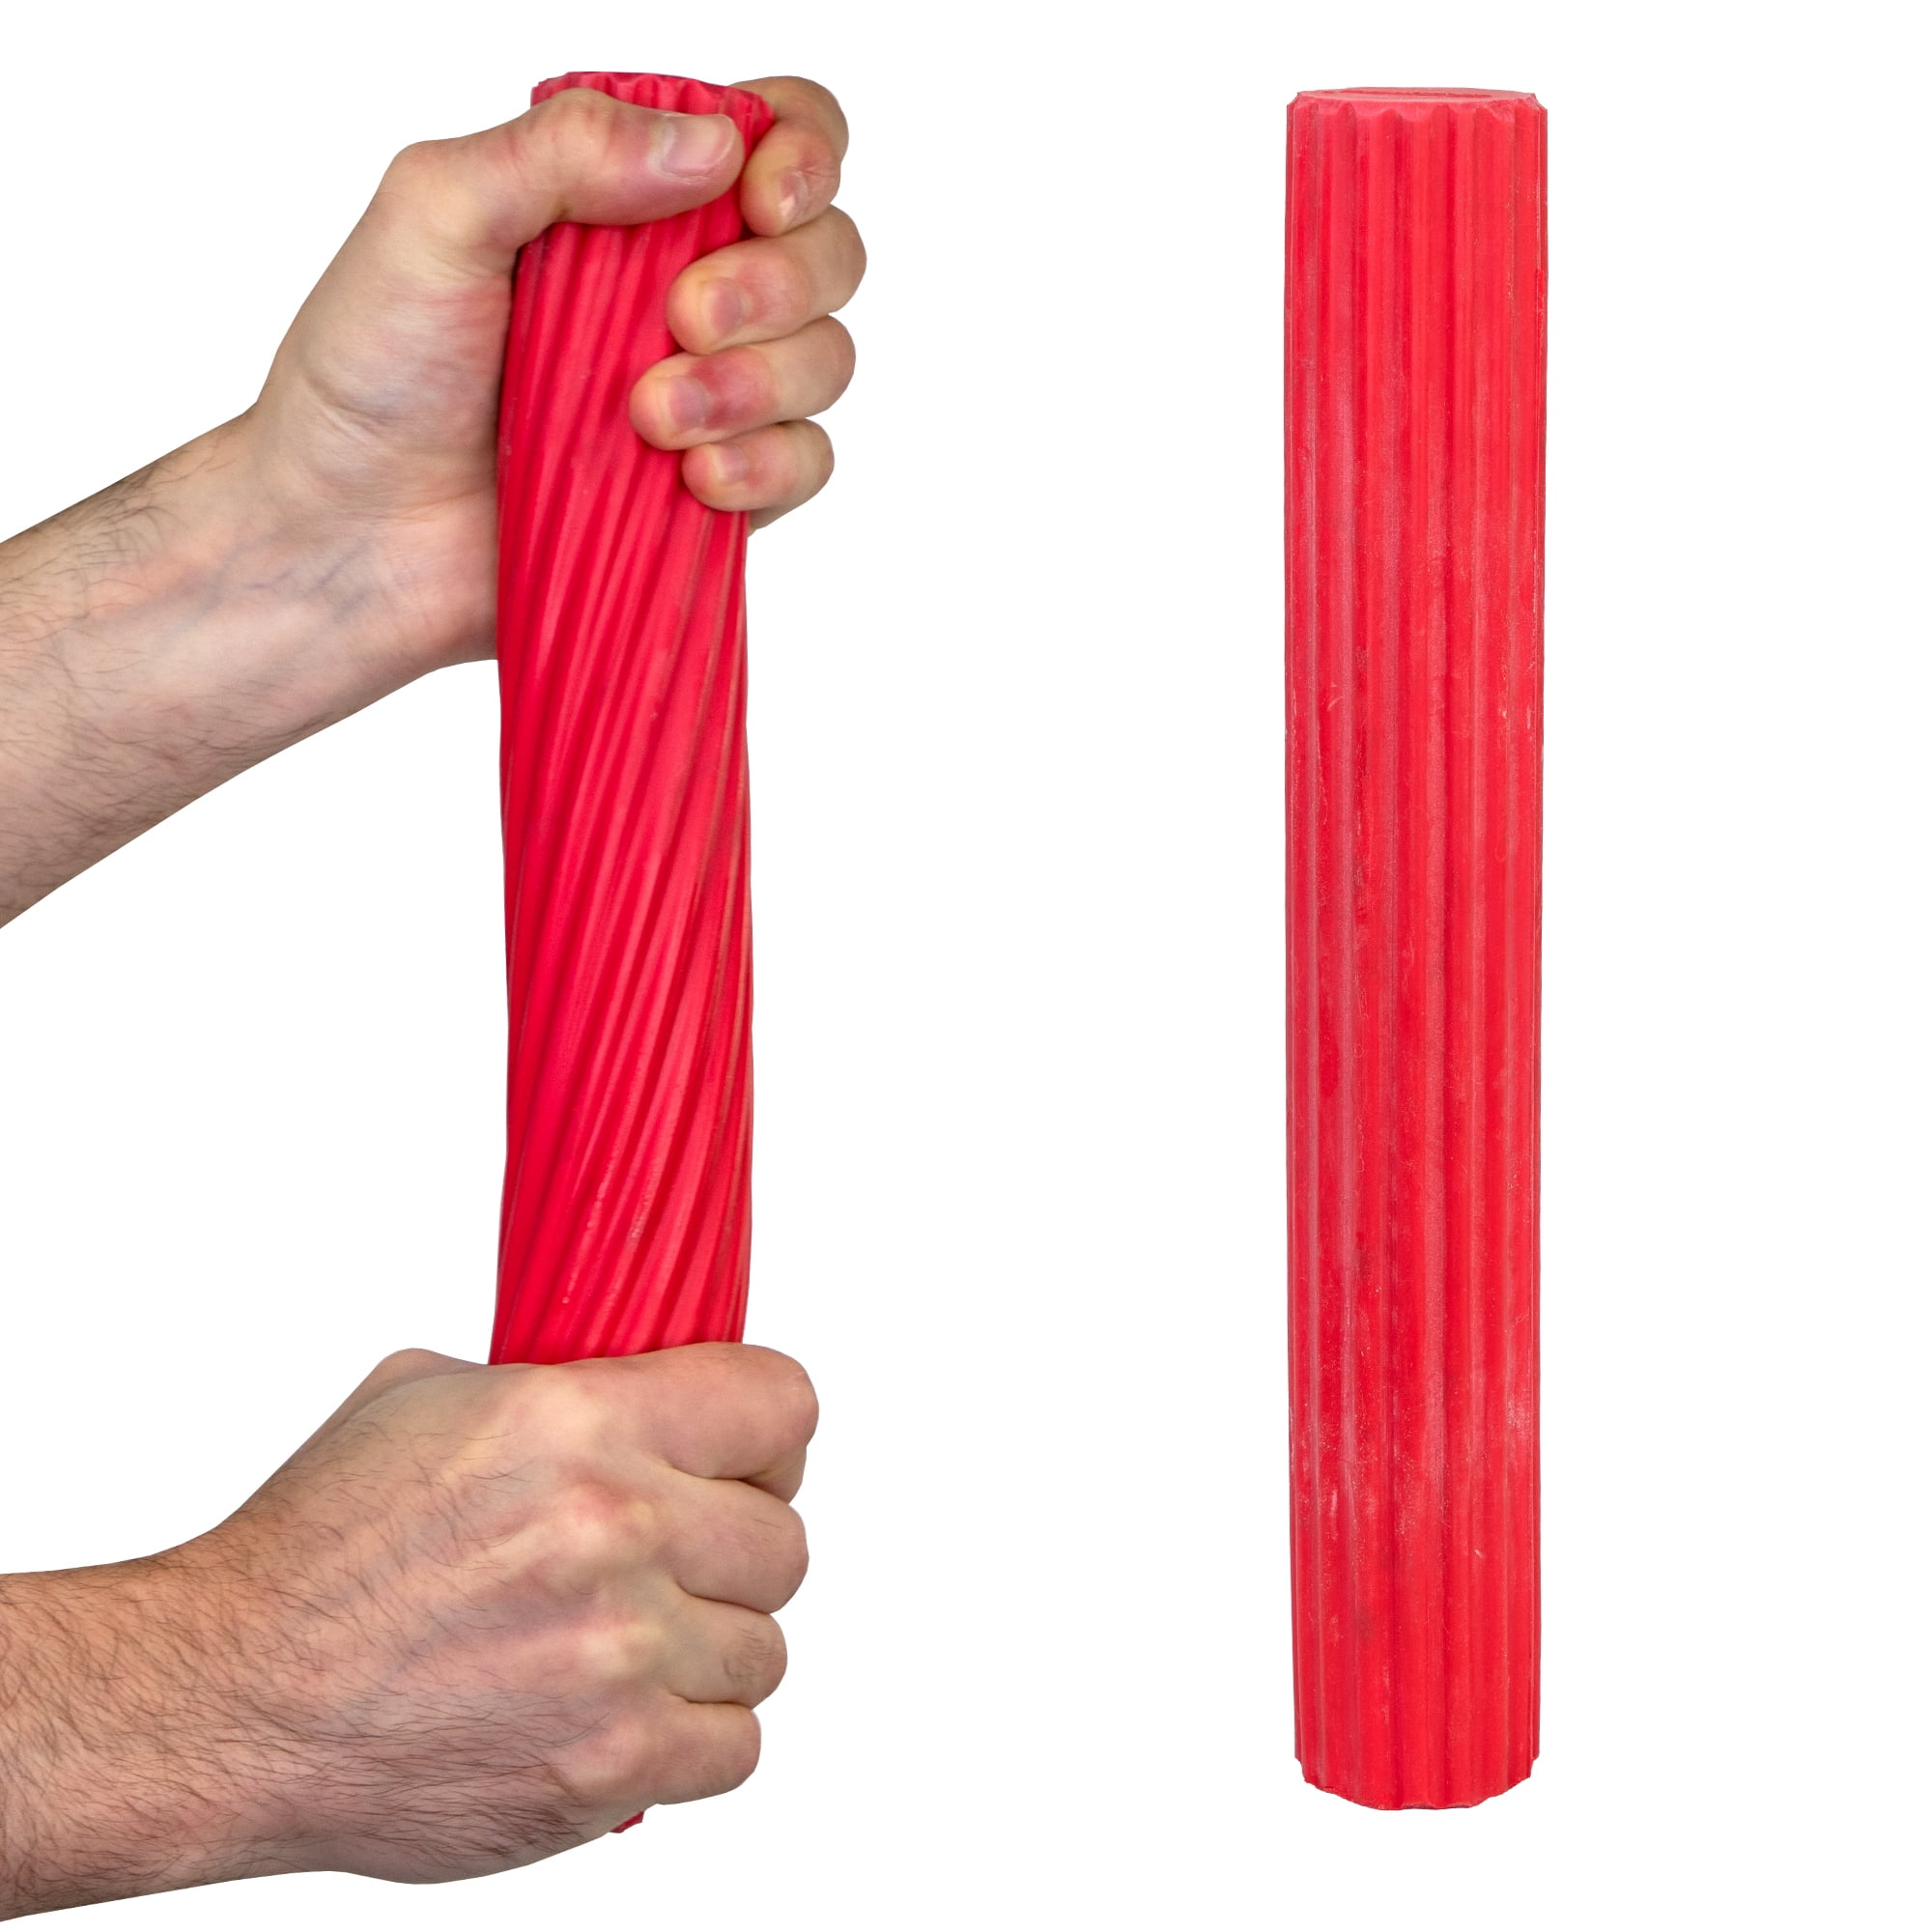 Light Resistance Cando 10-1512 Red Twist-n-Bend Hand Exerciser 